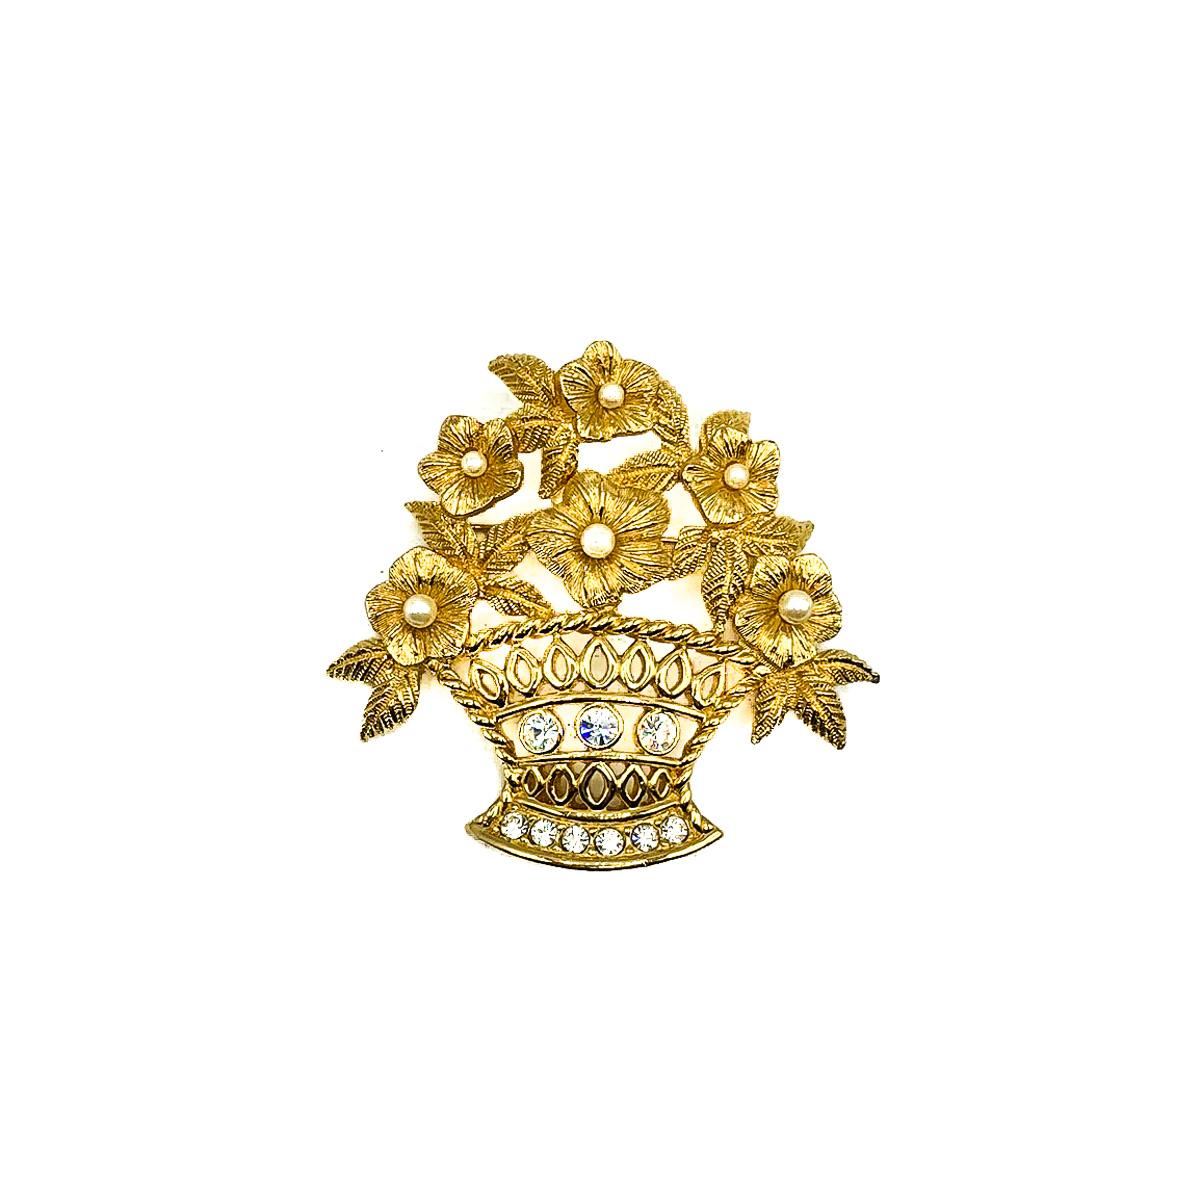 A Vintage Dior Flower Brooch. Crafted in gold plated metal and set with crystals and simulated pearls. In very good vintage condition. 6cms long. Signed. A beautiful statement brooch from the House of Dior that is so very classy and chic. Should you